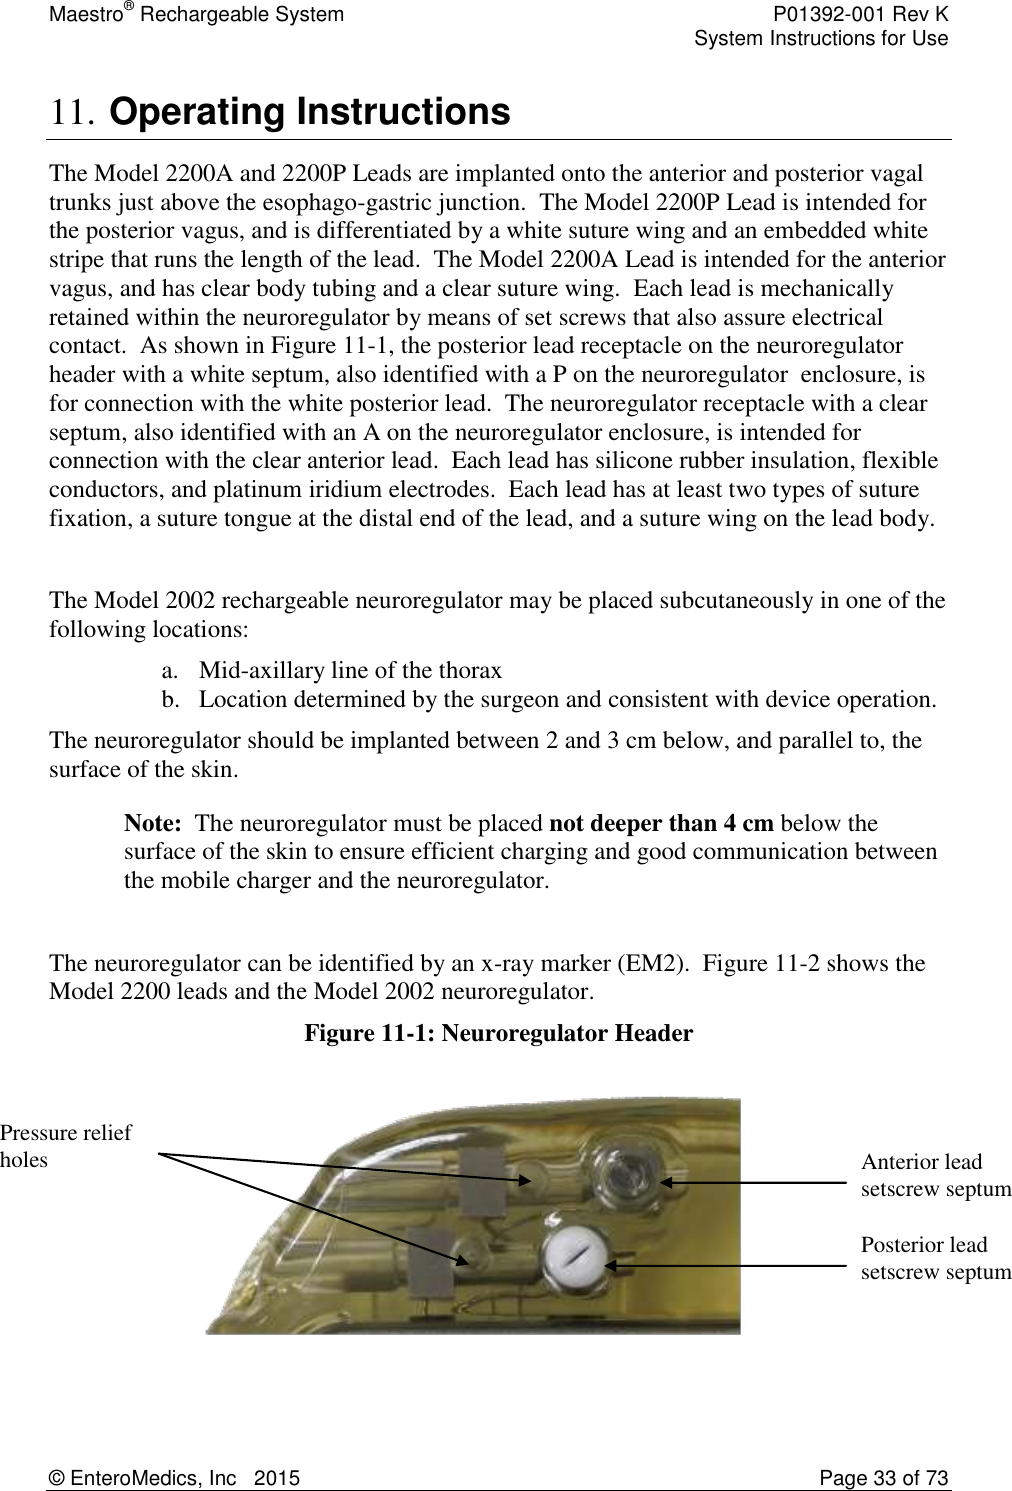 Maestro® Rechargeable System    P01392-001 Rev K     System Instructions for Use  © EnteroMedics, Inc   2015  Page 33 of 73  11. Operating Instructions The Model 2200A and 2200P Leads are implanted onto the anterior and posterior vagal trunks just above the esophago-gastric junction.  The Model 2200P Lead is intended for the posterior vagus, and is differentiated by a white suture wing and an embedded white stripe that runs the length of the lead.  The Model 2200A Lead is intended for the anterior vagus, and has clear body tubing and a clear suture wing.  Each lead is mechanically retained within the neuroregulator by means of set screws that also assure electrical contact.  As shown in Figure 11-1, the posterior lead receptacle on the neuroregulator header with a white septum, also identified with a P on the neuroregulator  enclosure, is for connection with the white posterior lead.  The neuroregulator receptacle with a clear septum, also identified with an A on the neuroregulator enclosure, is intended for connection with the clear anterior lead.  Each lead has silicone rubber insulation, flexible conductors, and platinum iridium electrodes.  Each lead has at least two types of suture fixation, a suture tongue at the distal end of the lead, and a suture wing on the lead body.  The Model 2002 rechargeable neuroregulator may be placed subcutaneously in one of the following locations:  a. Mid-axillary line of the thorax  b. Location determined by the surgeon and consistent with device operation.   The neuroregulator should be implanted between 2 and 3 cm below, and parallel to, the surface of the skin. Note:  The neuroregulator must be placed not deeper than 4 cm below the surface of the skin to ensure efficient charging and good communication between the mobile charger and the neuroregulator.  The neuroregulator can be identified by an x-ray marker (EM2).  Figure 11-2 shows the Model 2200 leads and the Model 2002 neuroregulator.  Figure 11-1: Neuroregulator Header    Anterior lead setscrew septum Posterior lead setscrew septum Pressure relief holes 